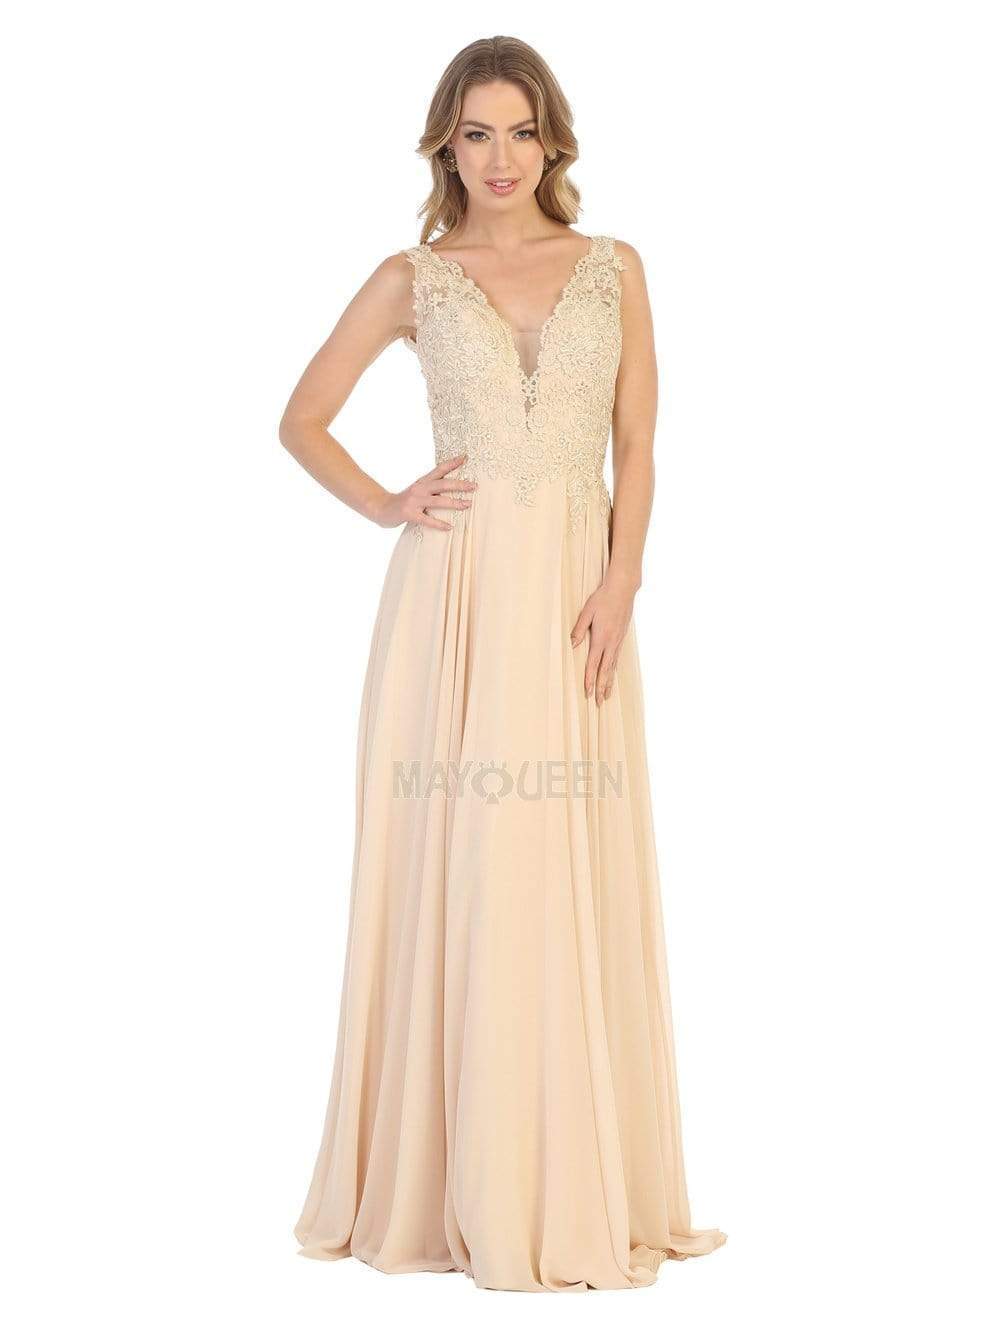 May Queen - MQ1754 Embroidered Deep V-neck A-line Dress Prom Dresses 4 / Champagne